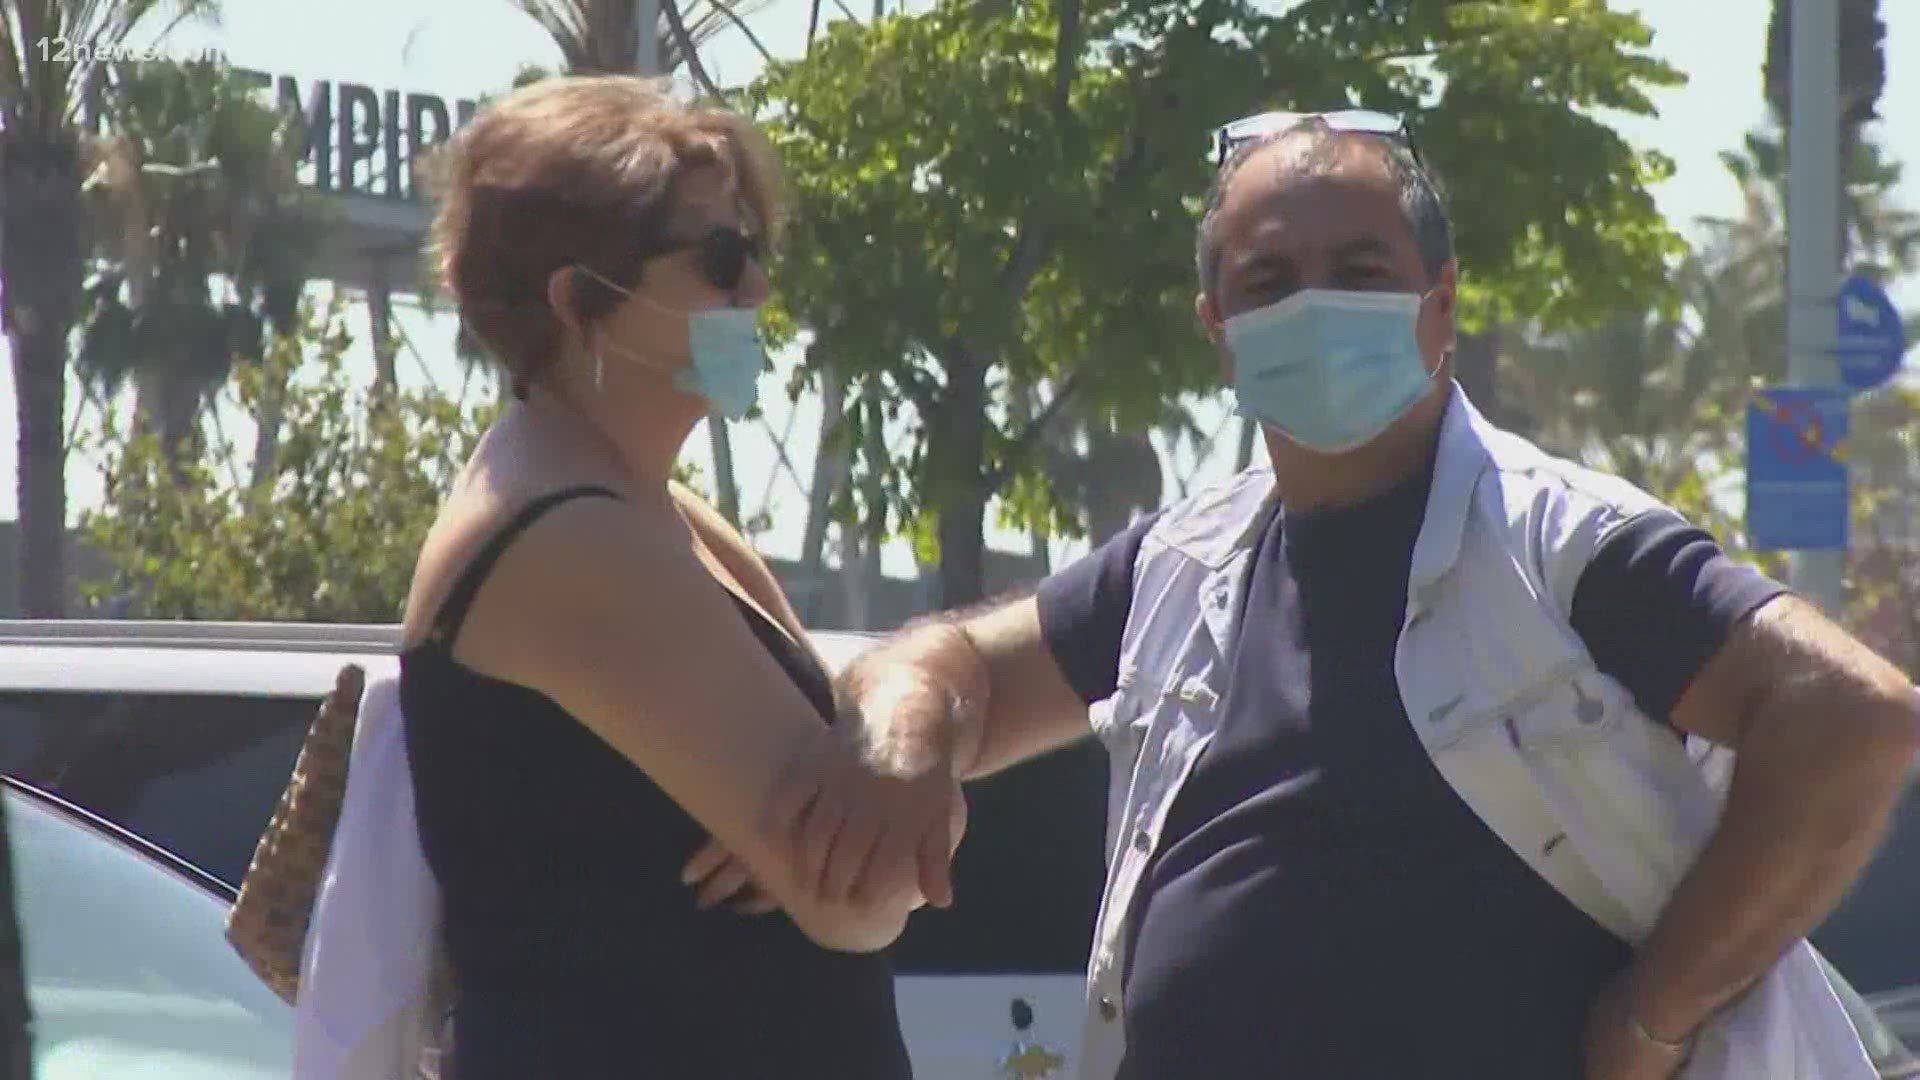 The mandatory wearing of a mask continues to be a hot topic across the country and in Arizona. Maricopa County officials are discussing if the madndate should remain